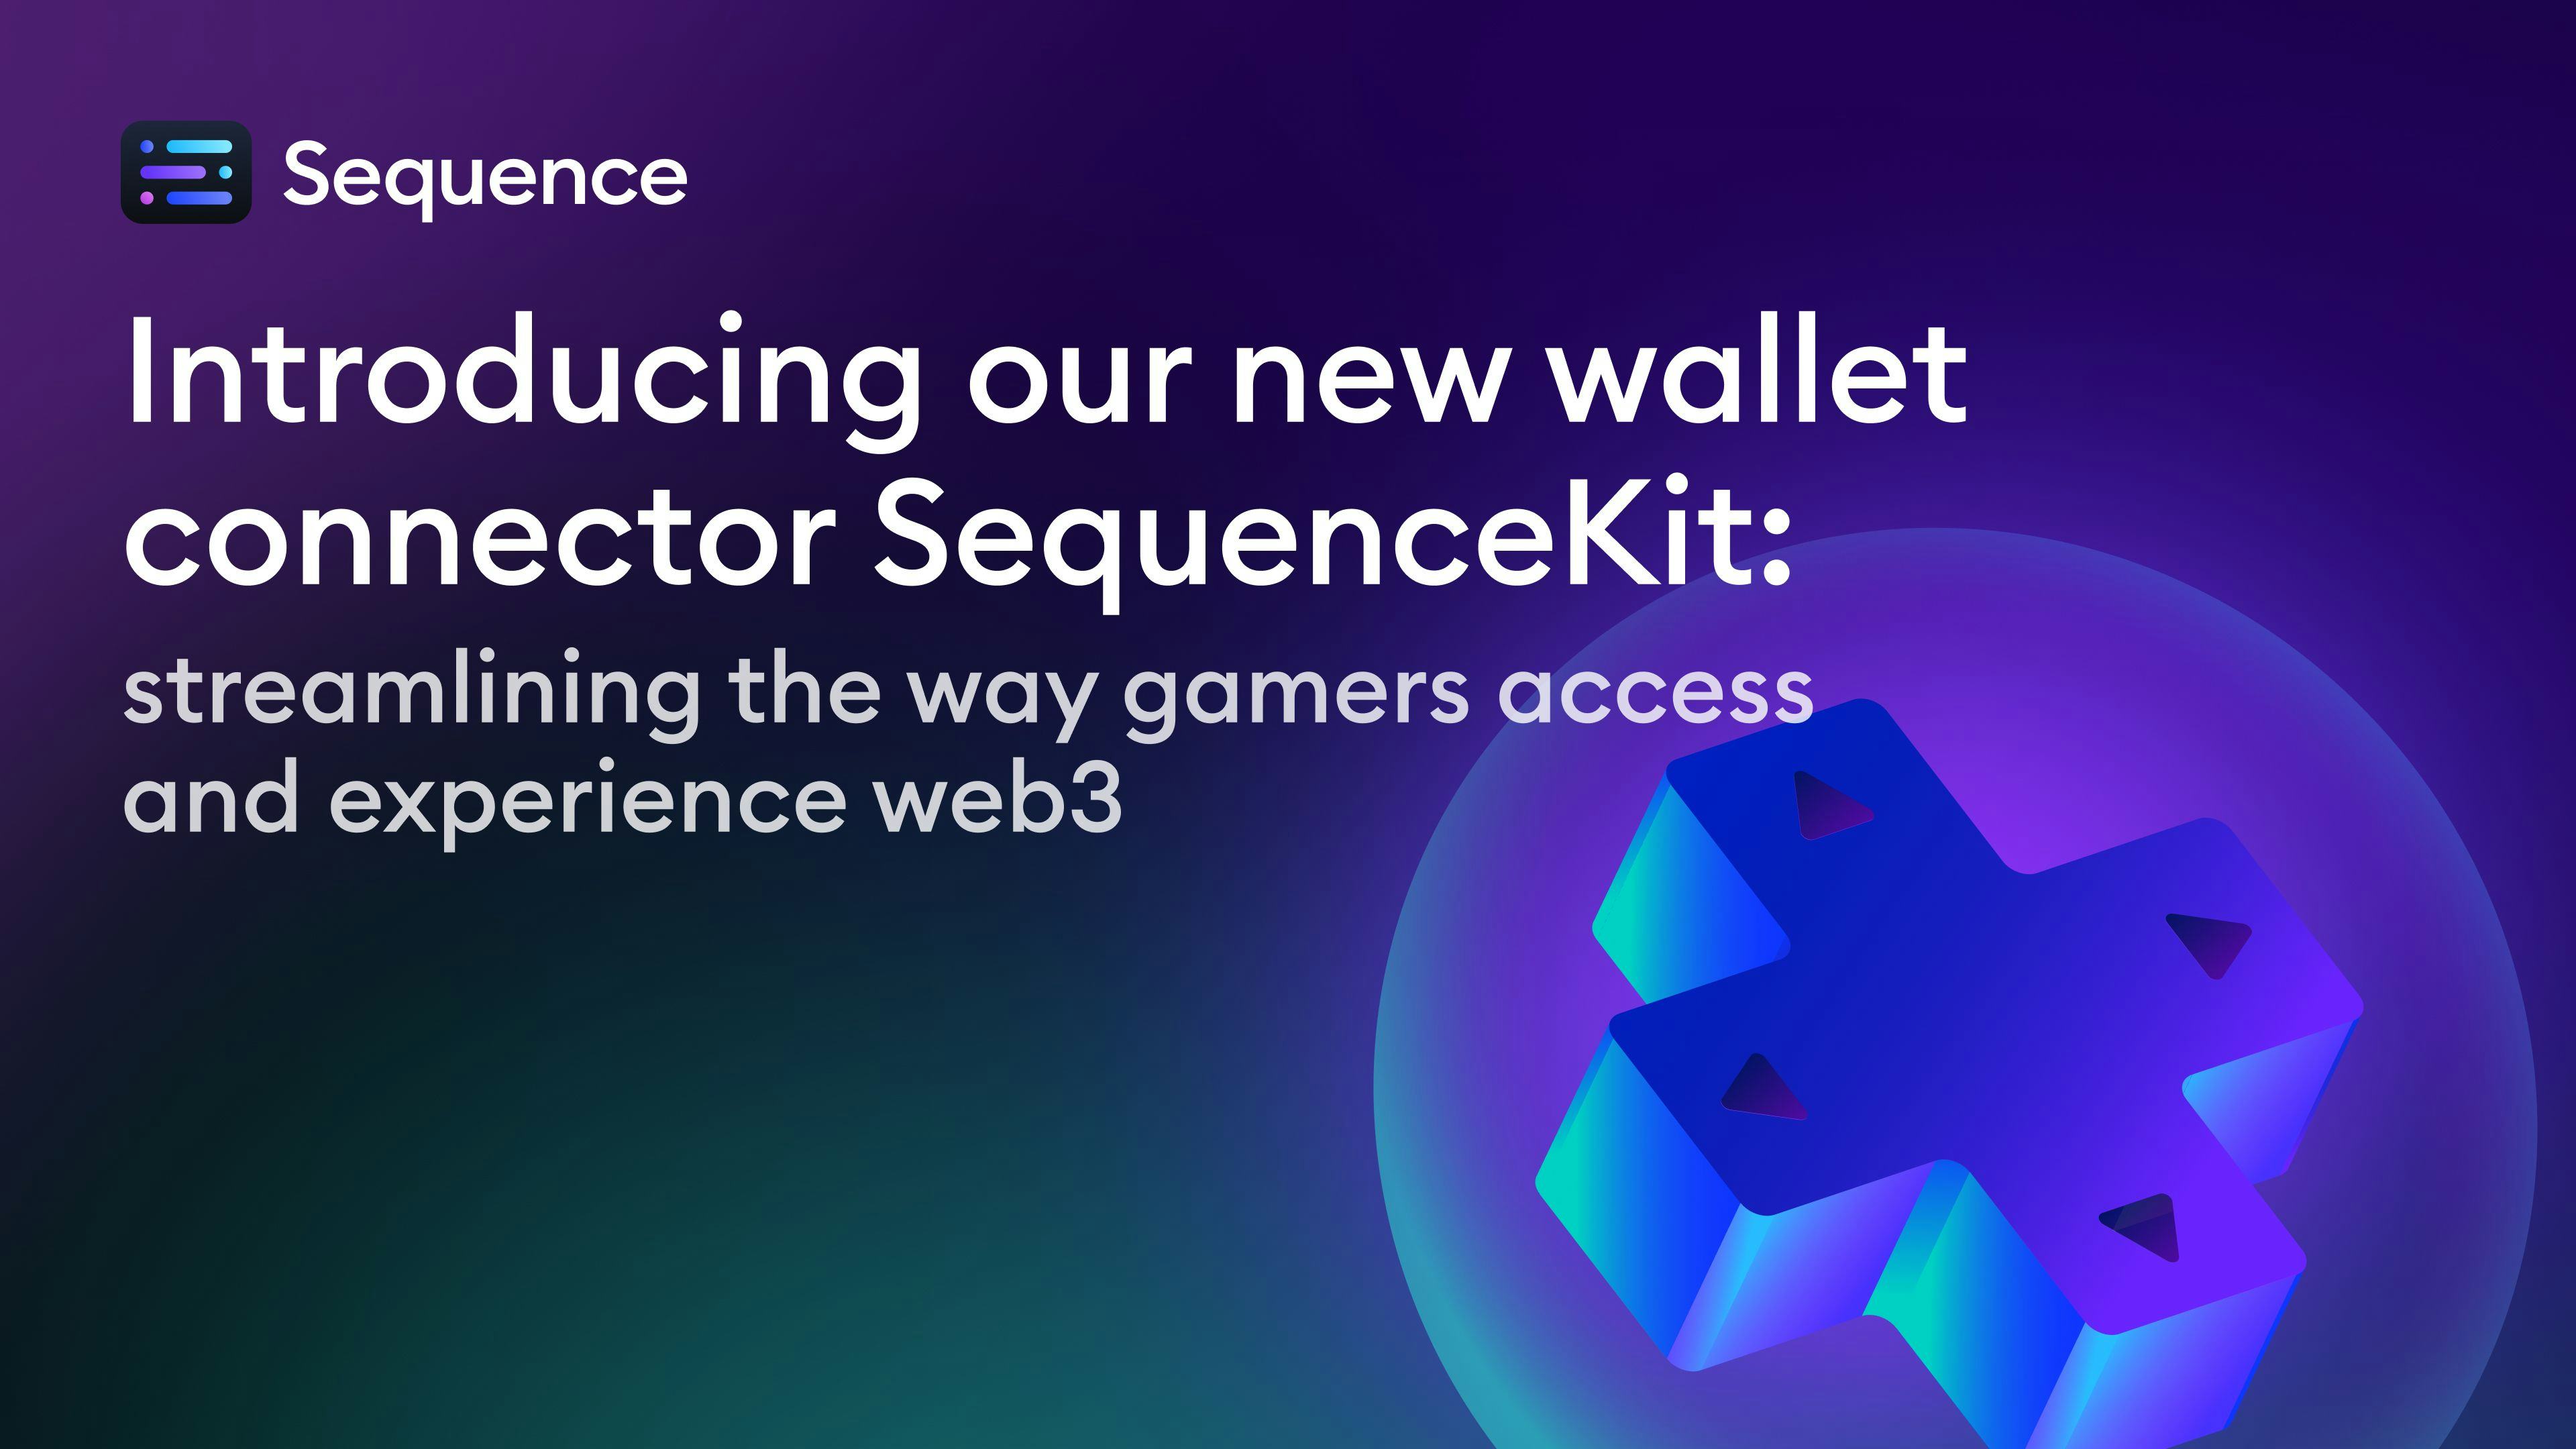 Sequence Reveals New Web3 Wallet Connector: SequenceKit